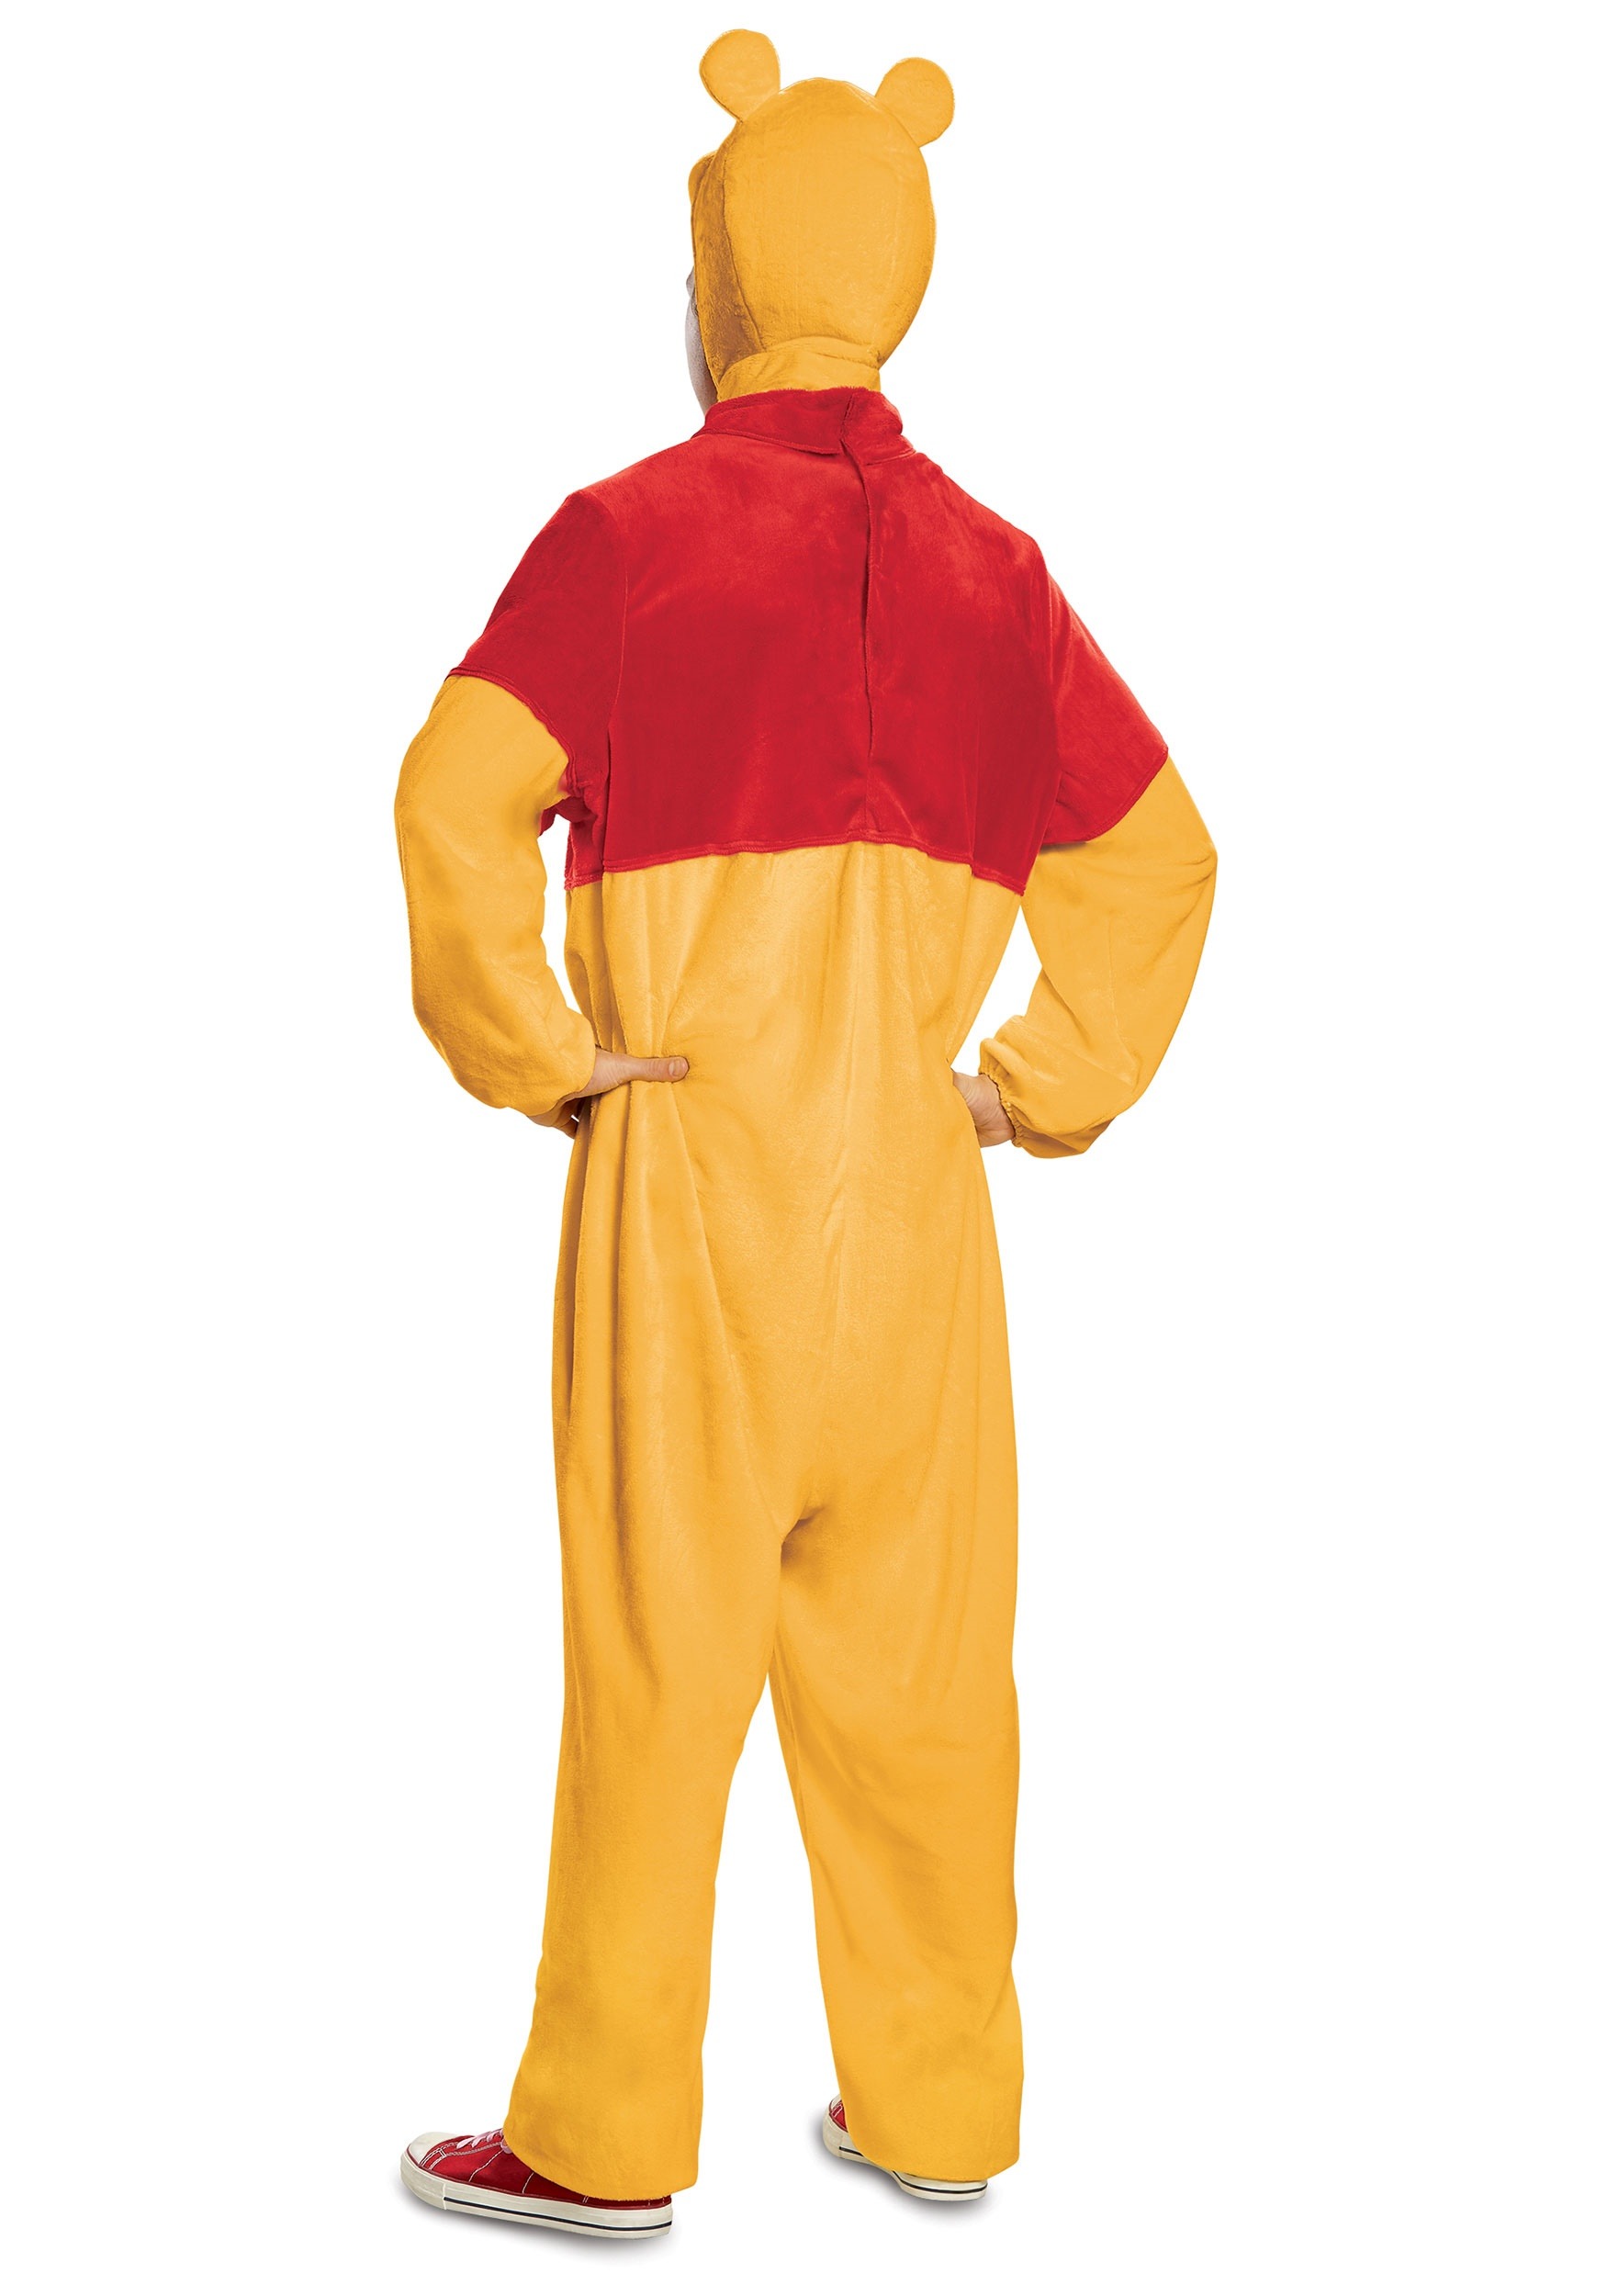 Winnie the Pooh Deluxe Adult Costume - image 1 of 8